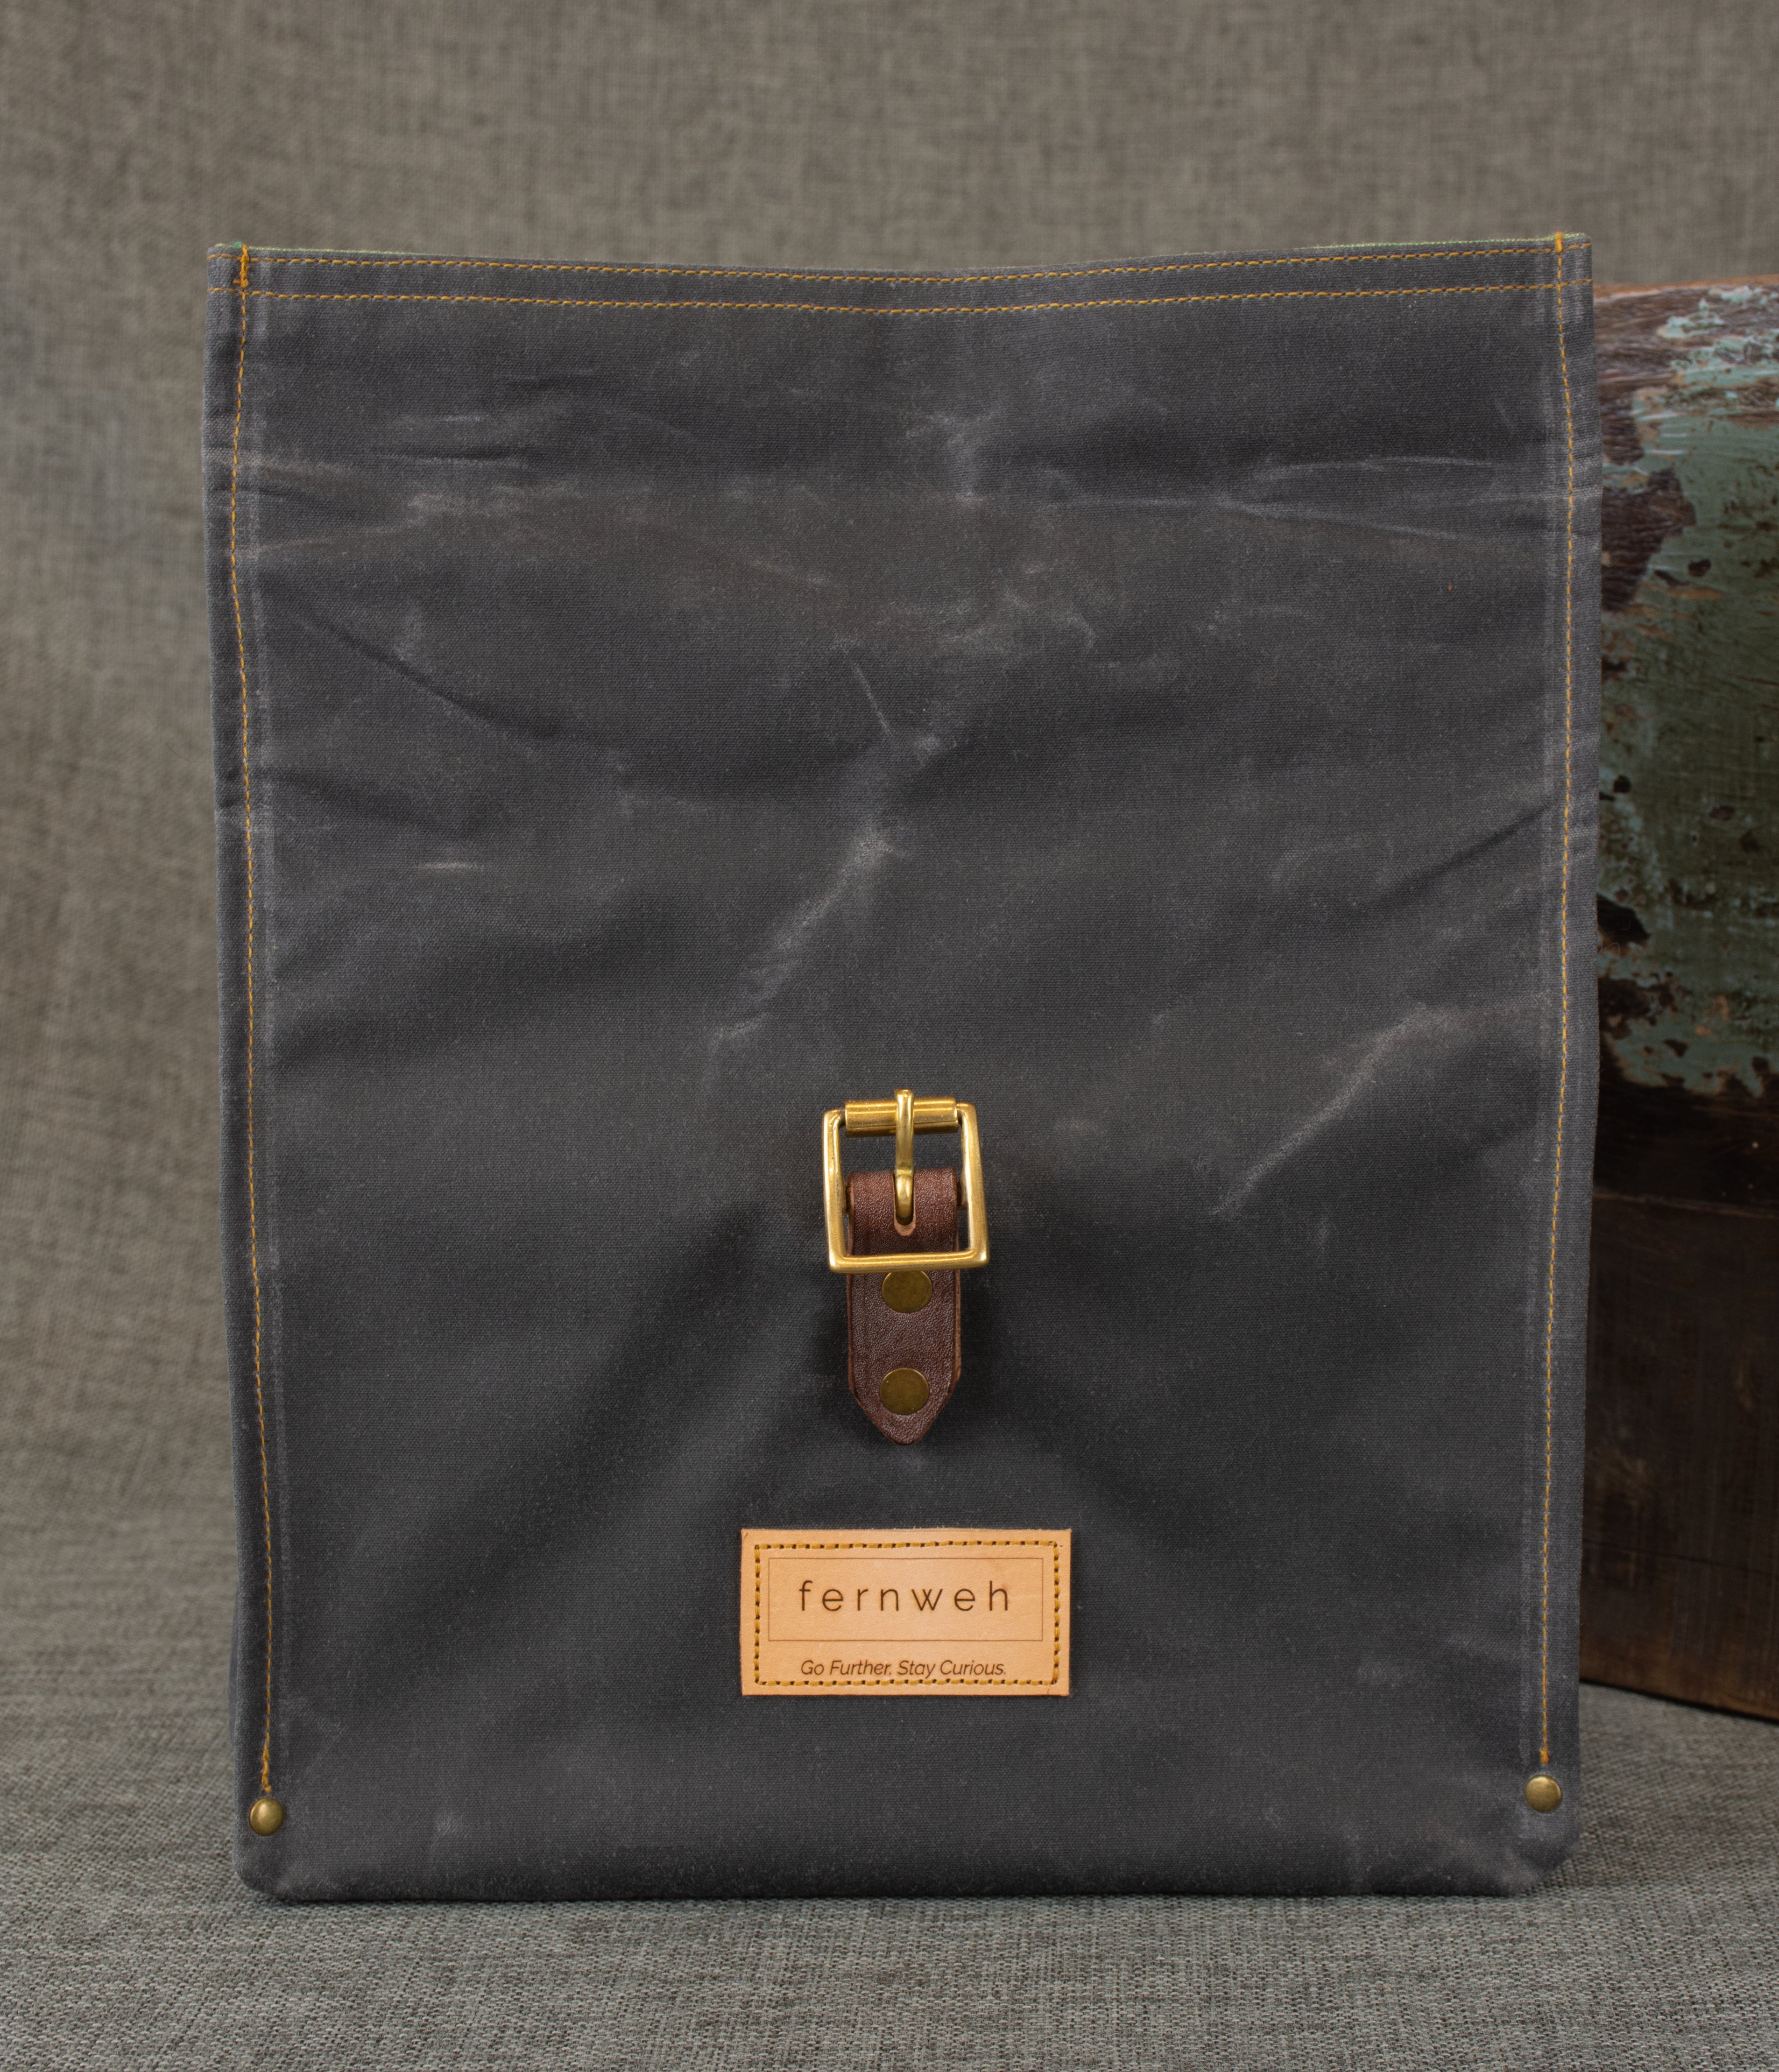 Image shows front, unrolled view of a grey waxed cotton roll top bag with a brown oak bark tanned leather strap on a grey linen background.